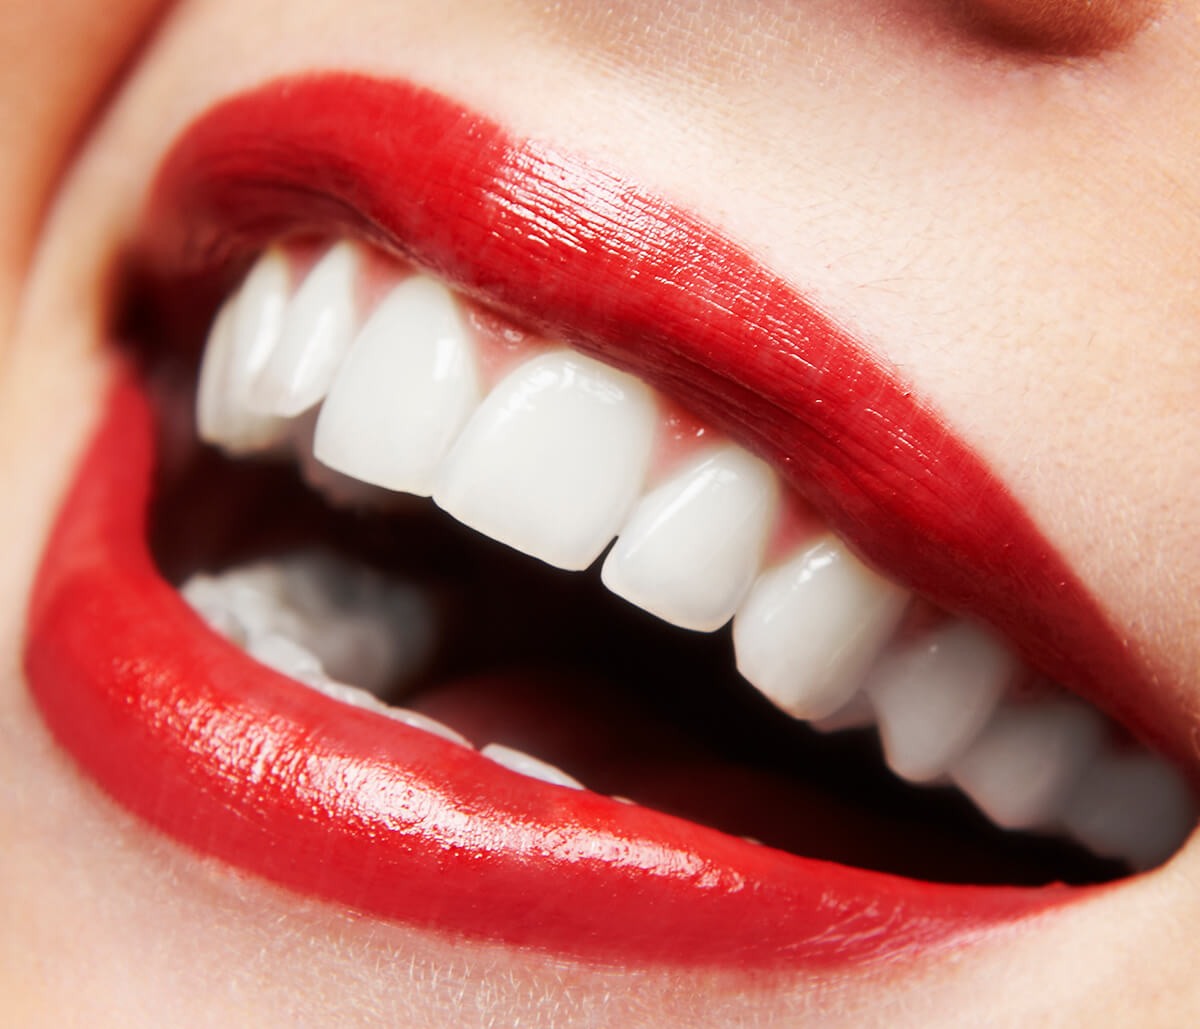 Cosmetic treatments for teeth: Small steps in Fort Worth make a big difference in your appearance, confidence